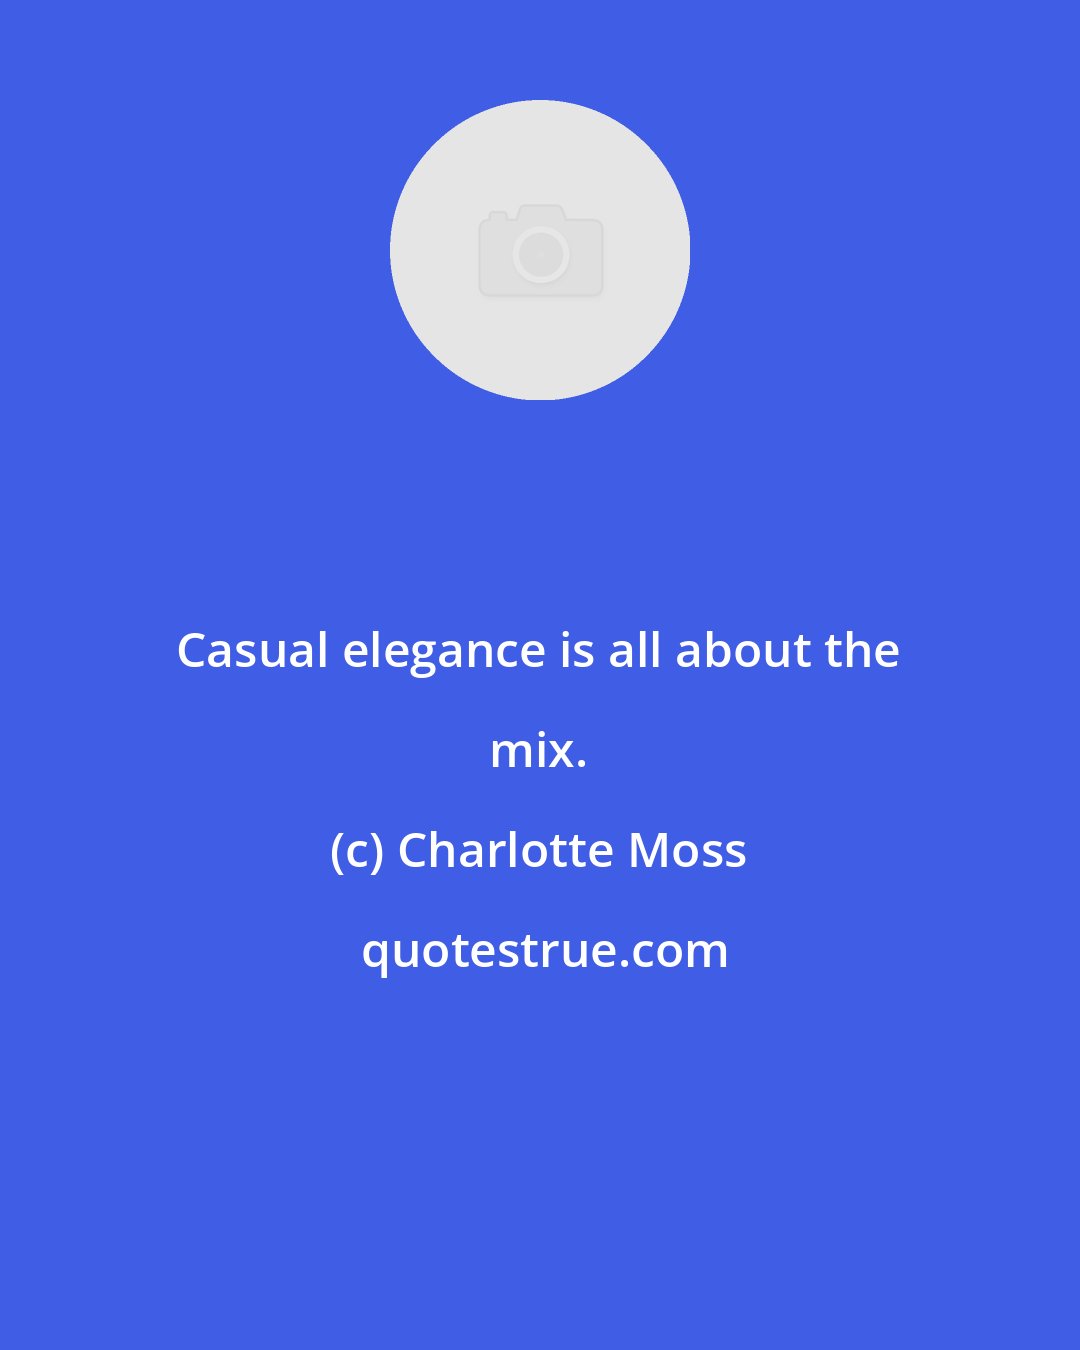 Charlotte Moss: Casual elegance is all about the mix.